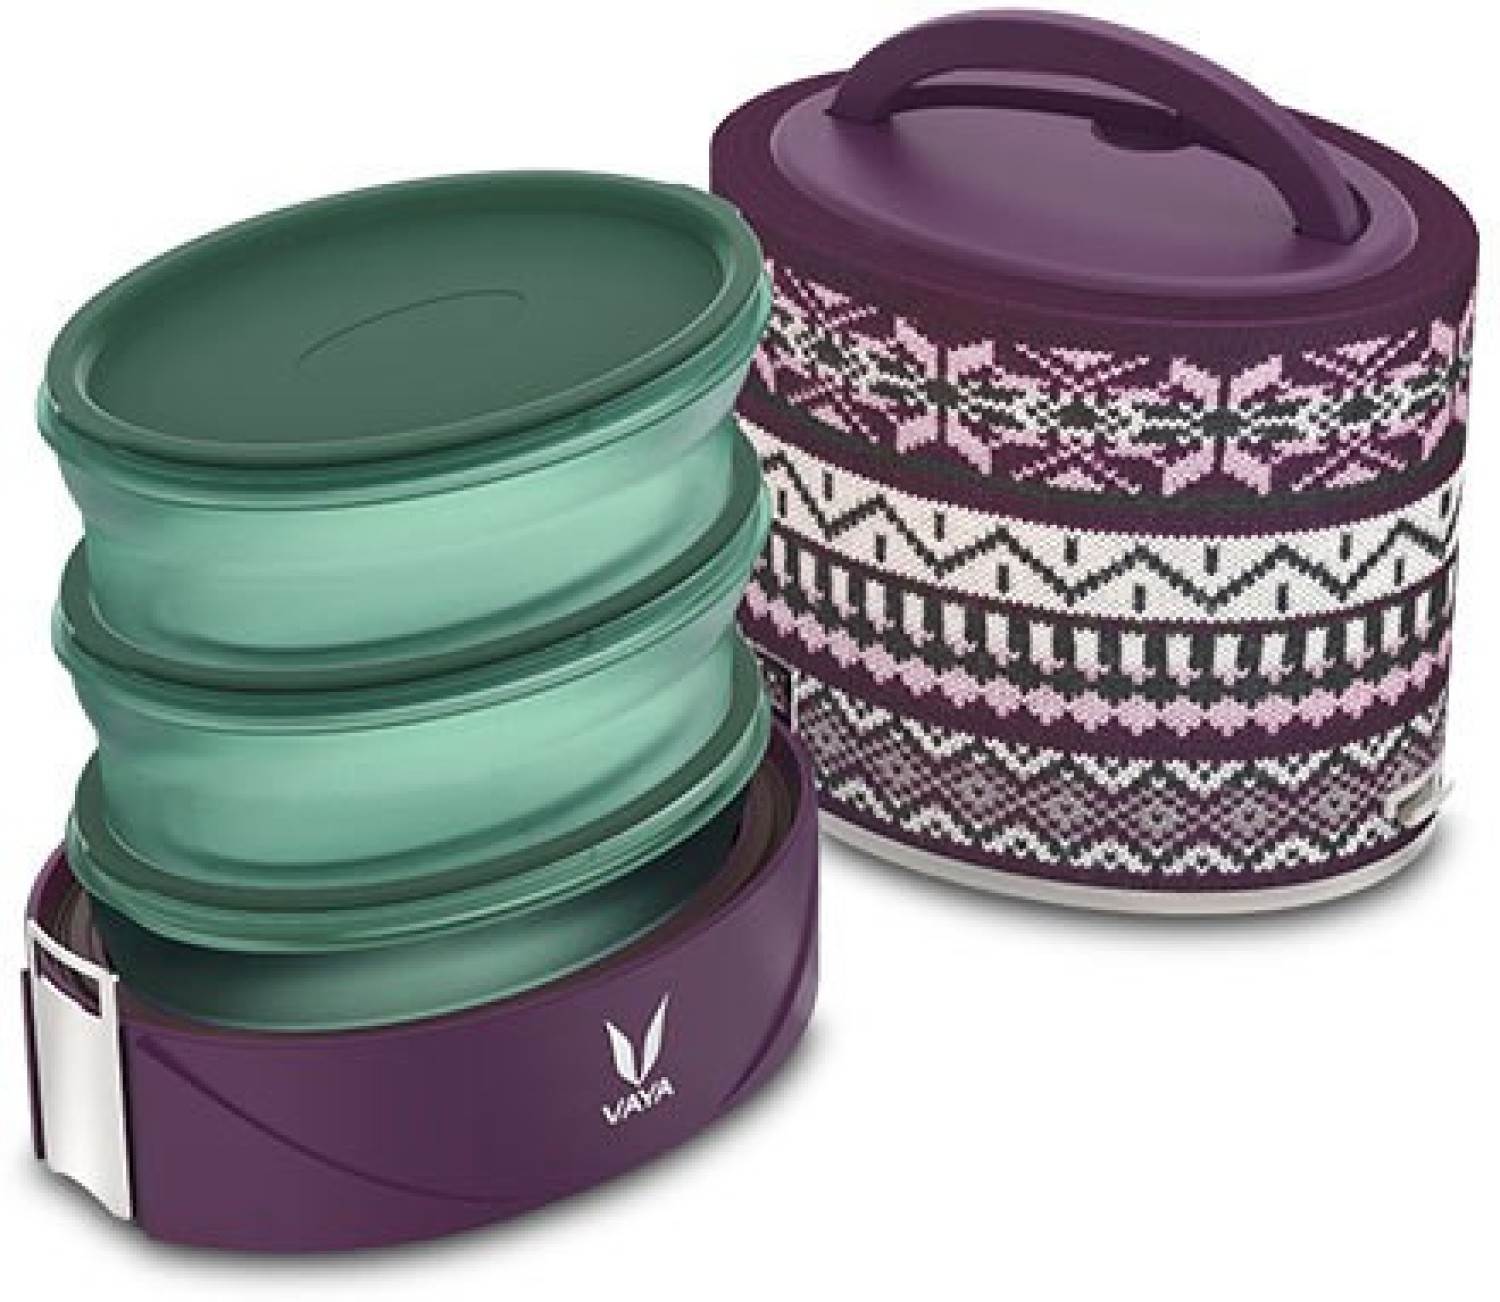  Vaya: 3 container Tyffyn Lunch Boxes